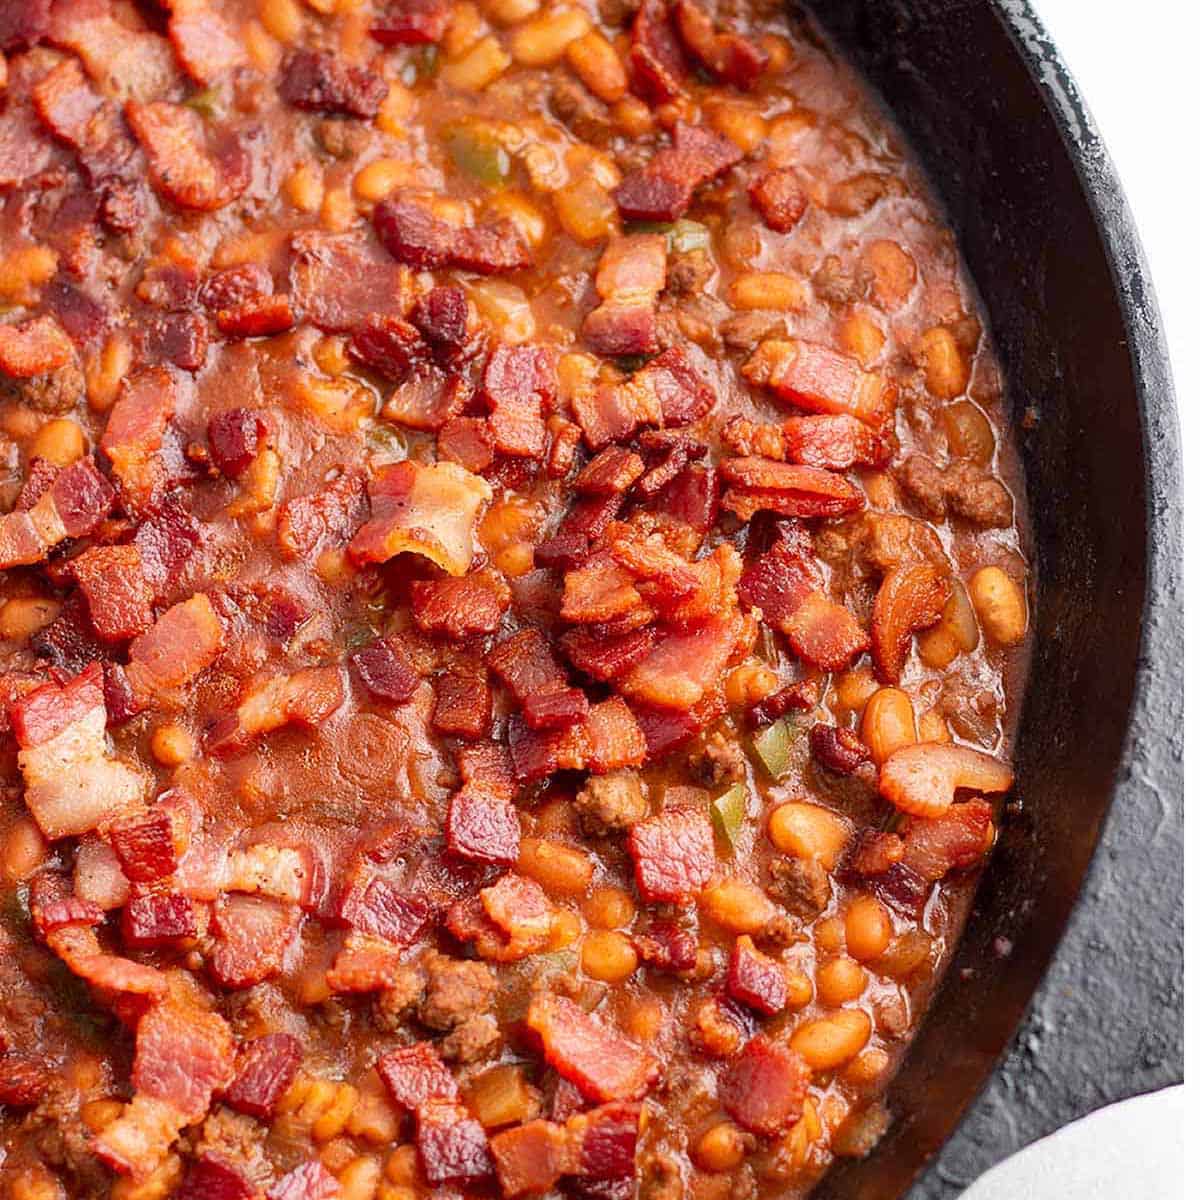 https://dirtanddough.com/wp-content/uploads/2022/06/baked-beans-with-ground-beef-featured-image2.jpg